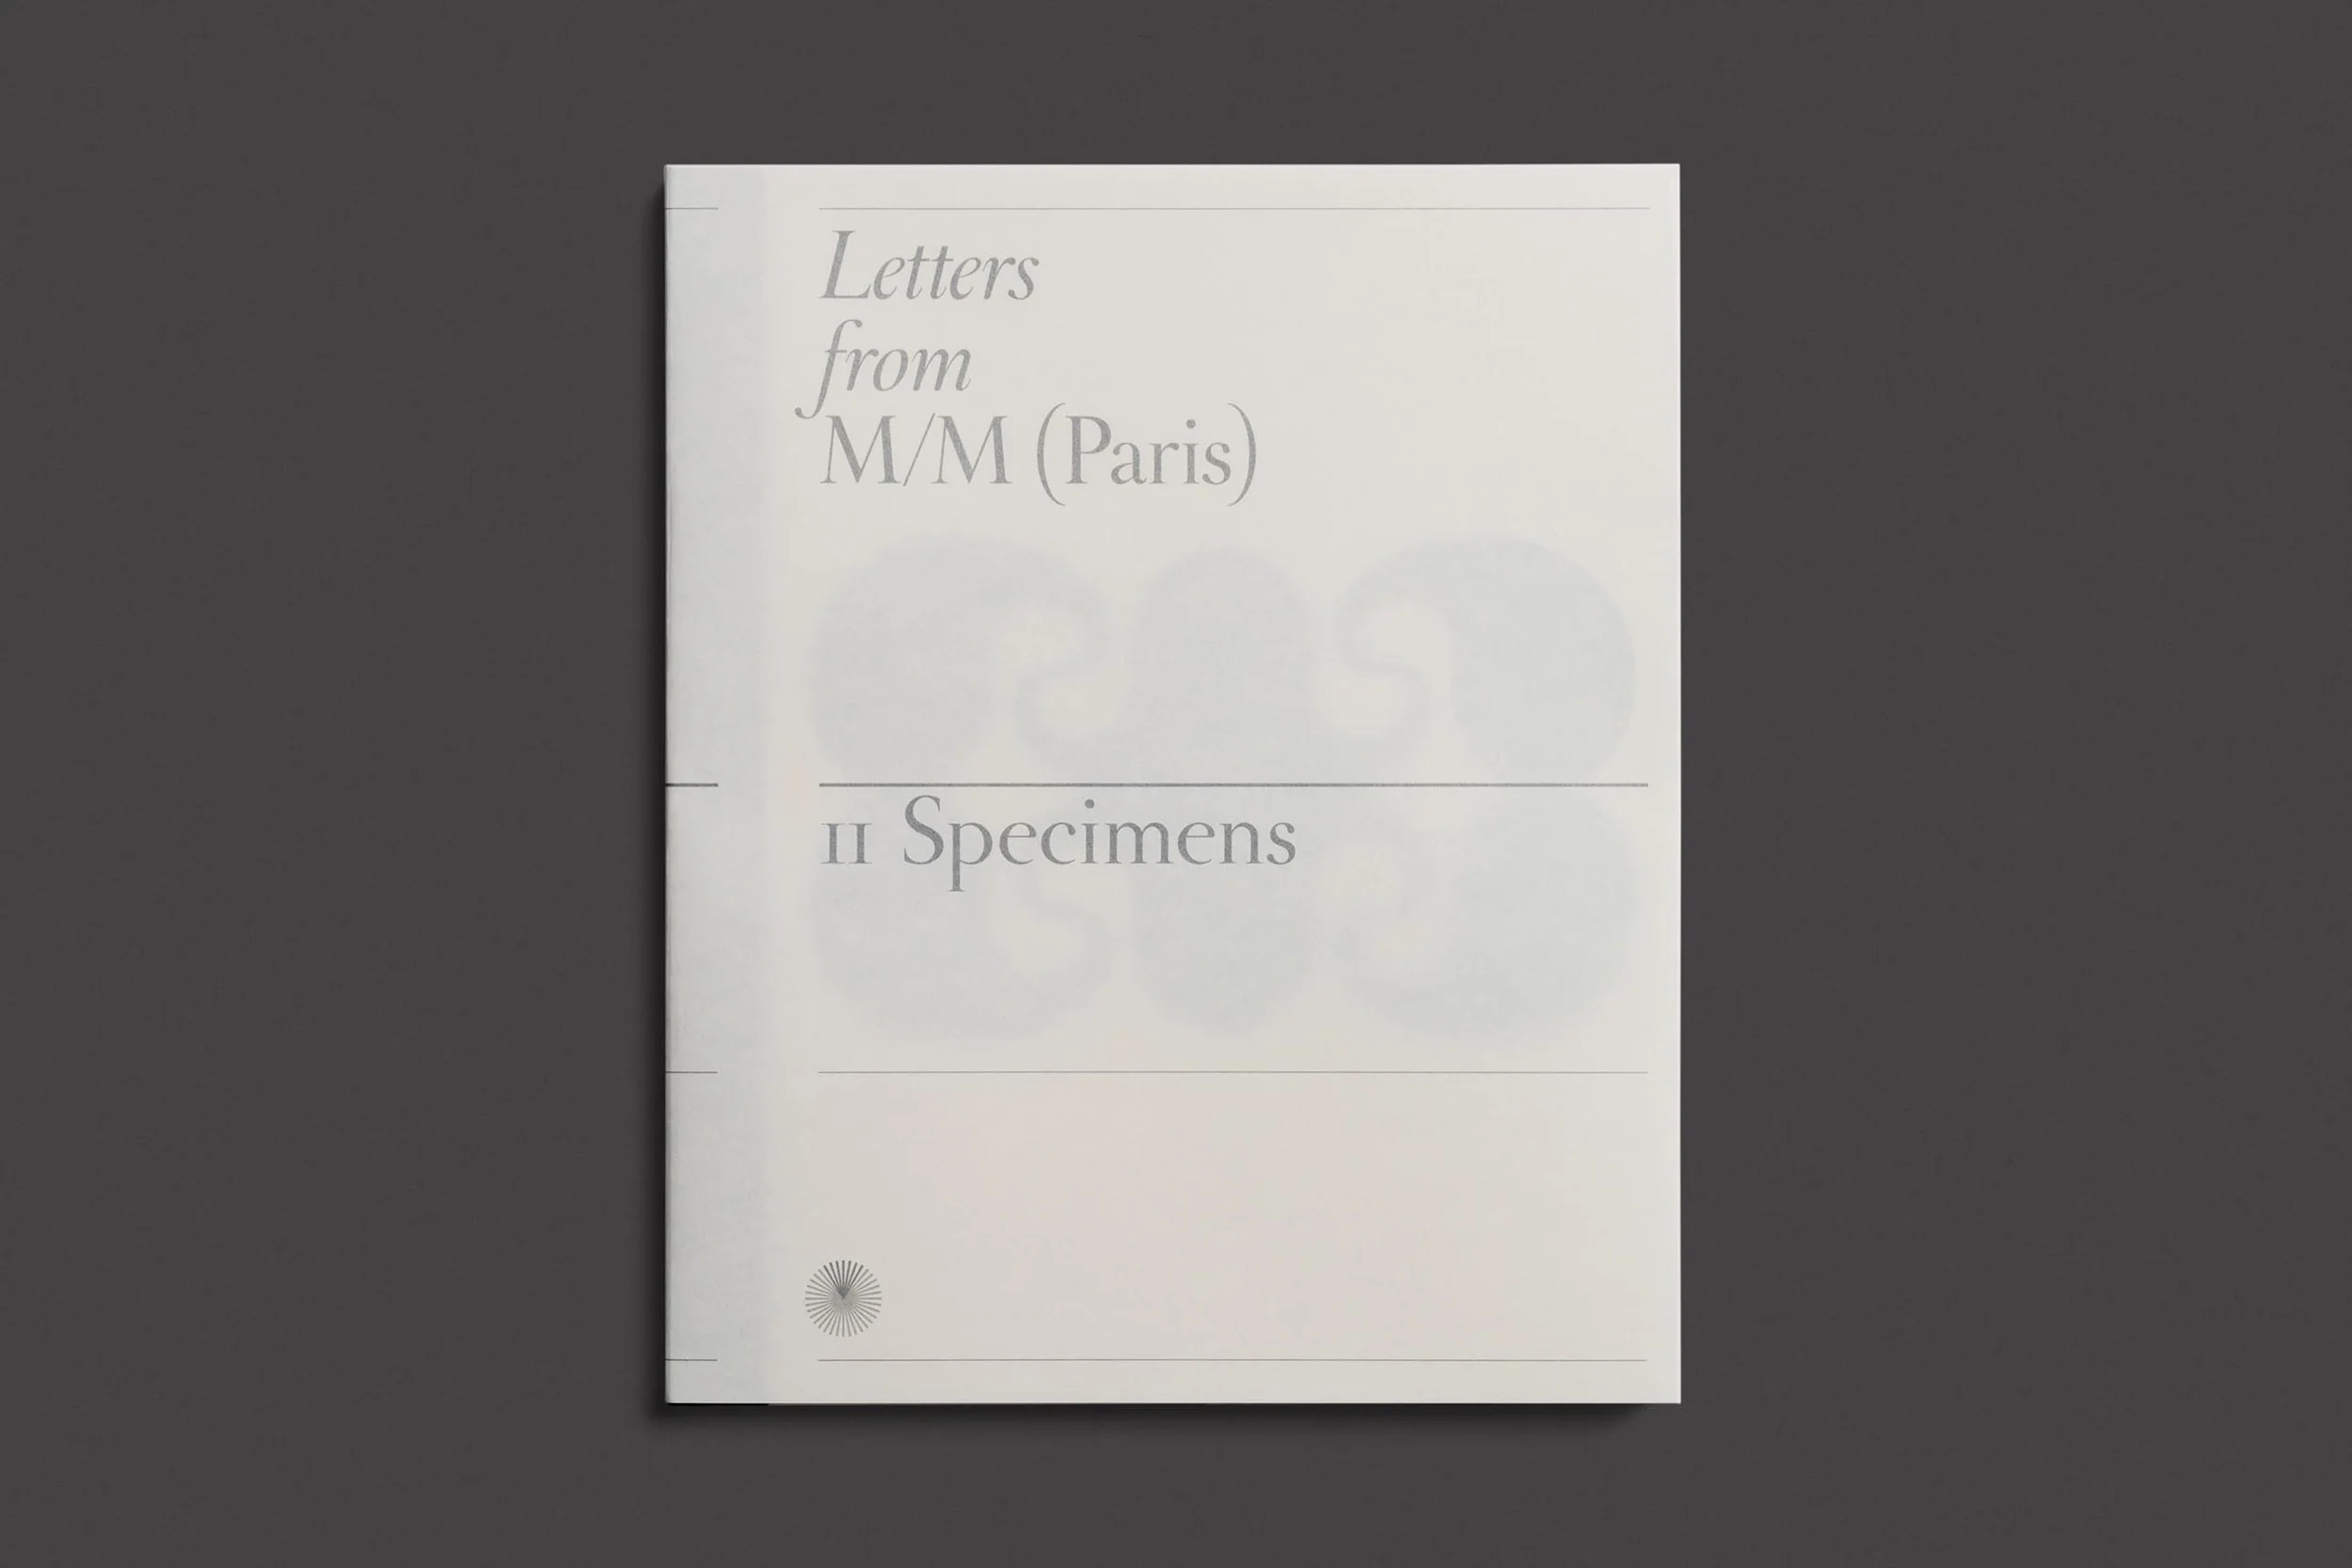 Letters from M/M (Paris) - Deluxe Collector's Edition | Papercut